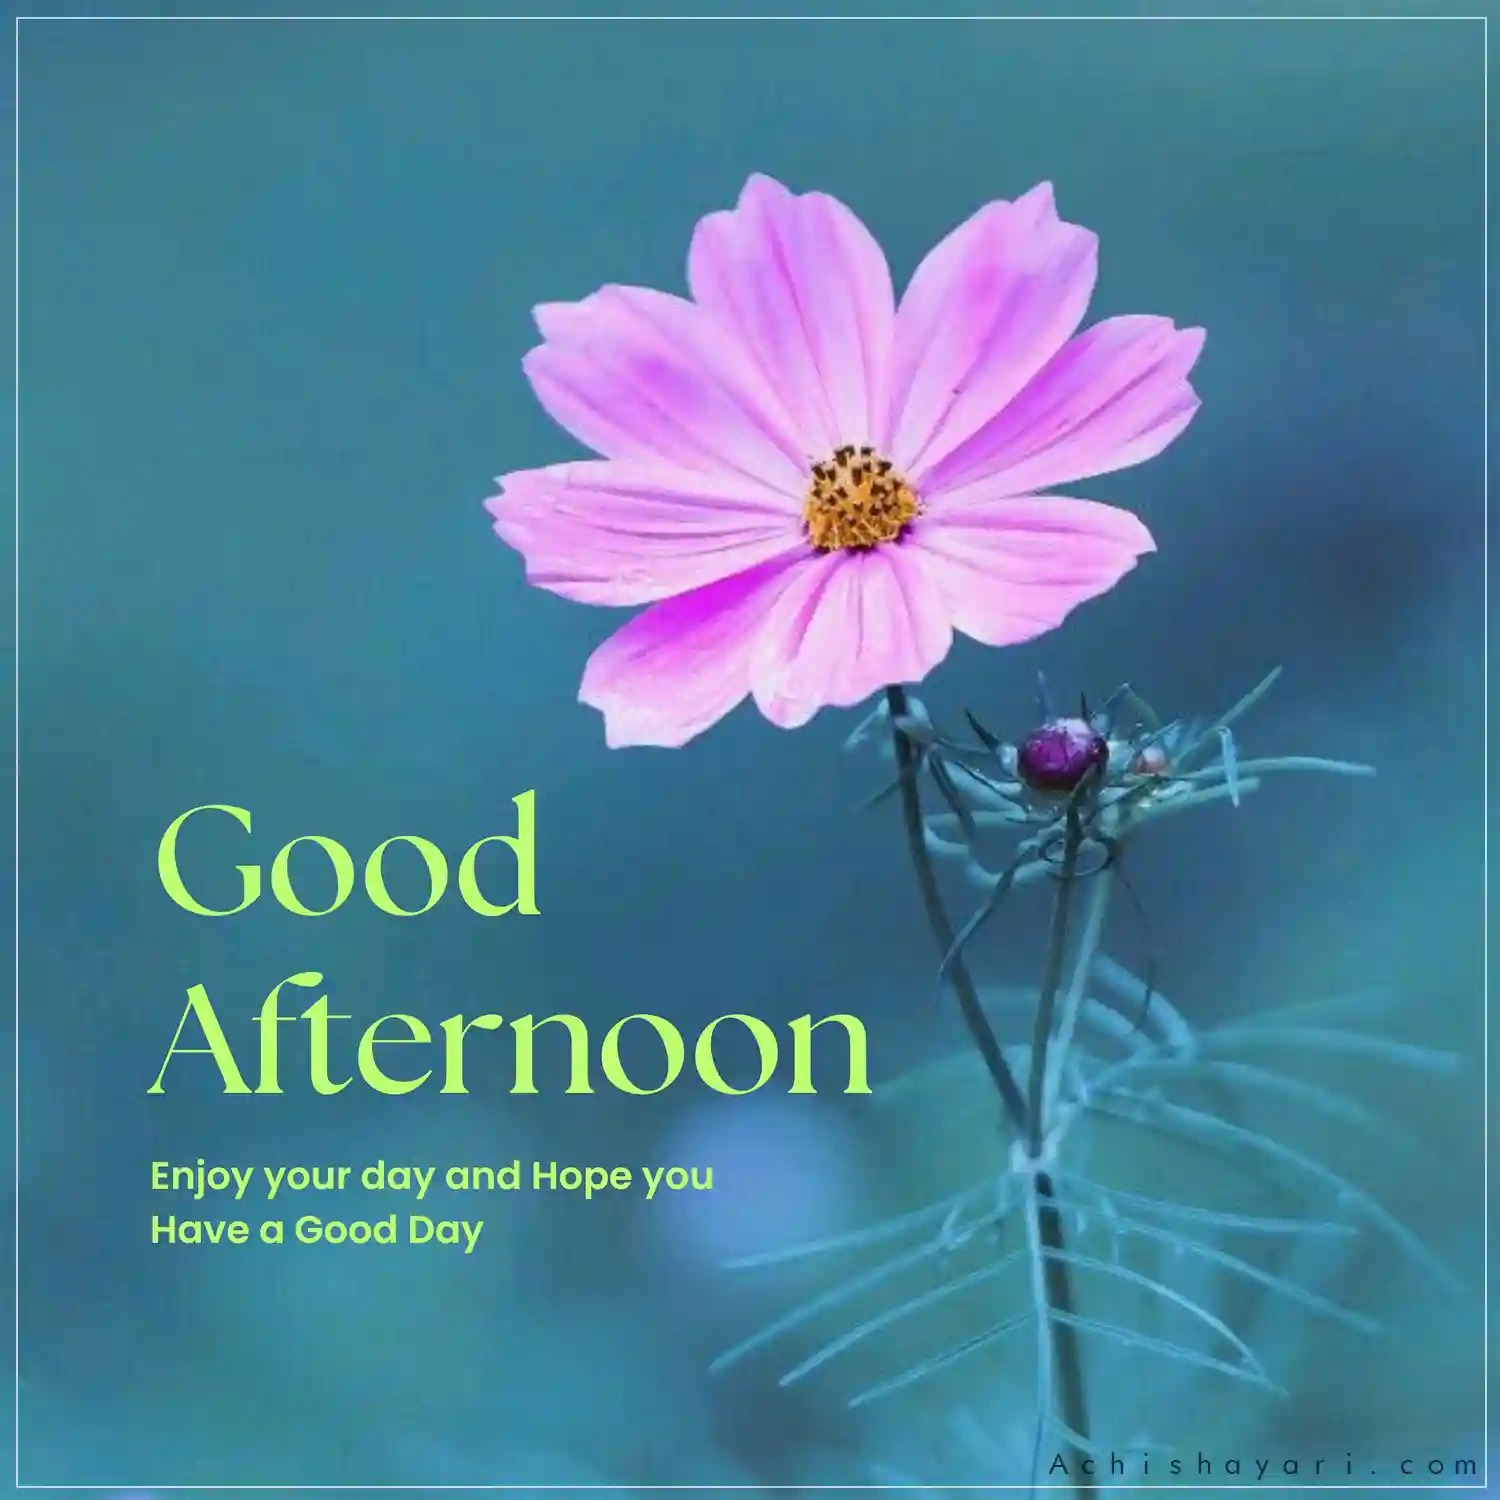 Good Afternoon Image HD Pic